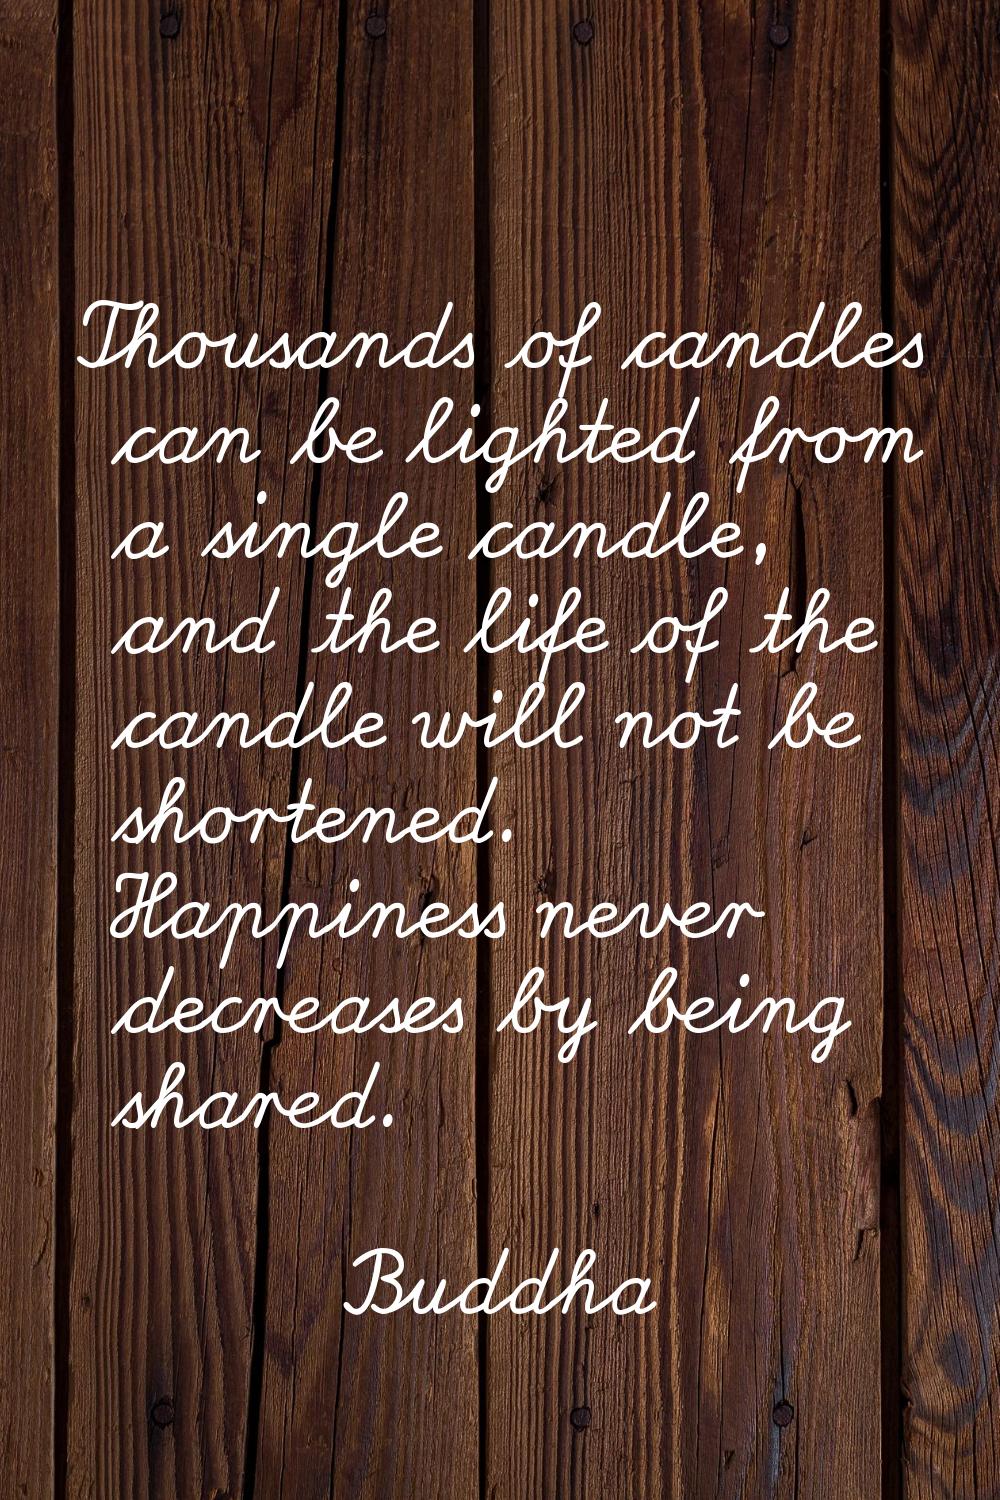 Thousands of candles can be lighted from a single candle, and the life of the candle will not be sh